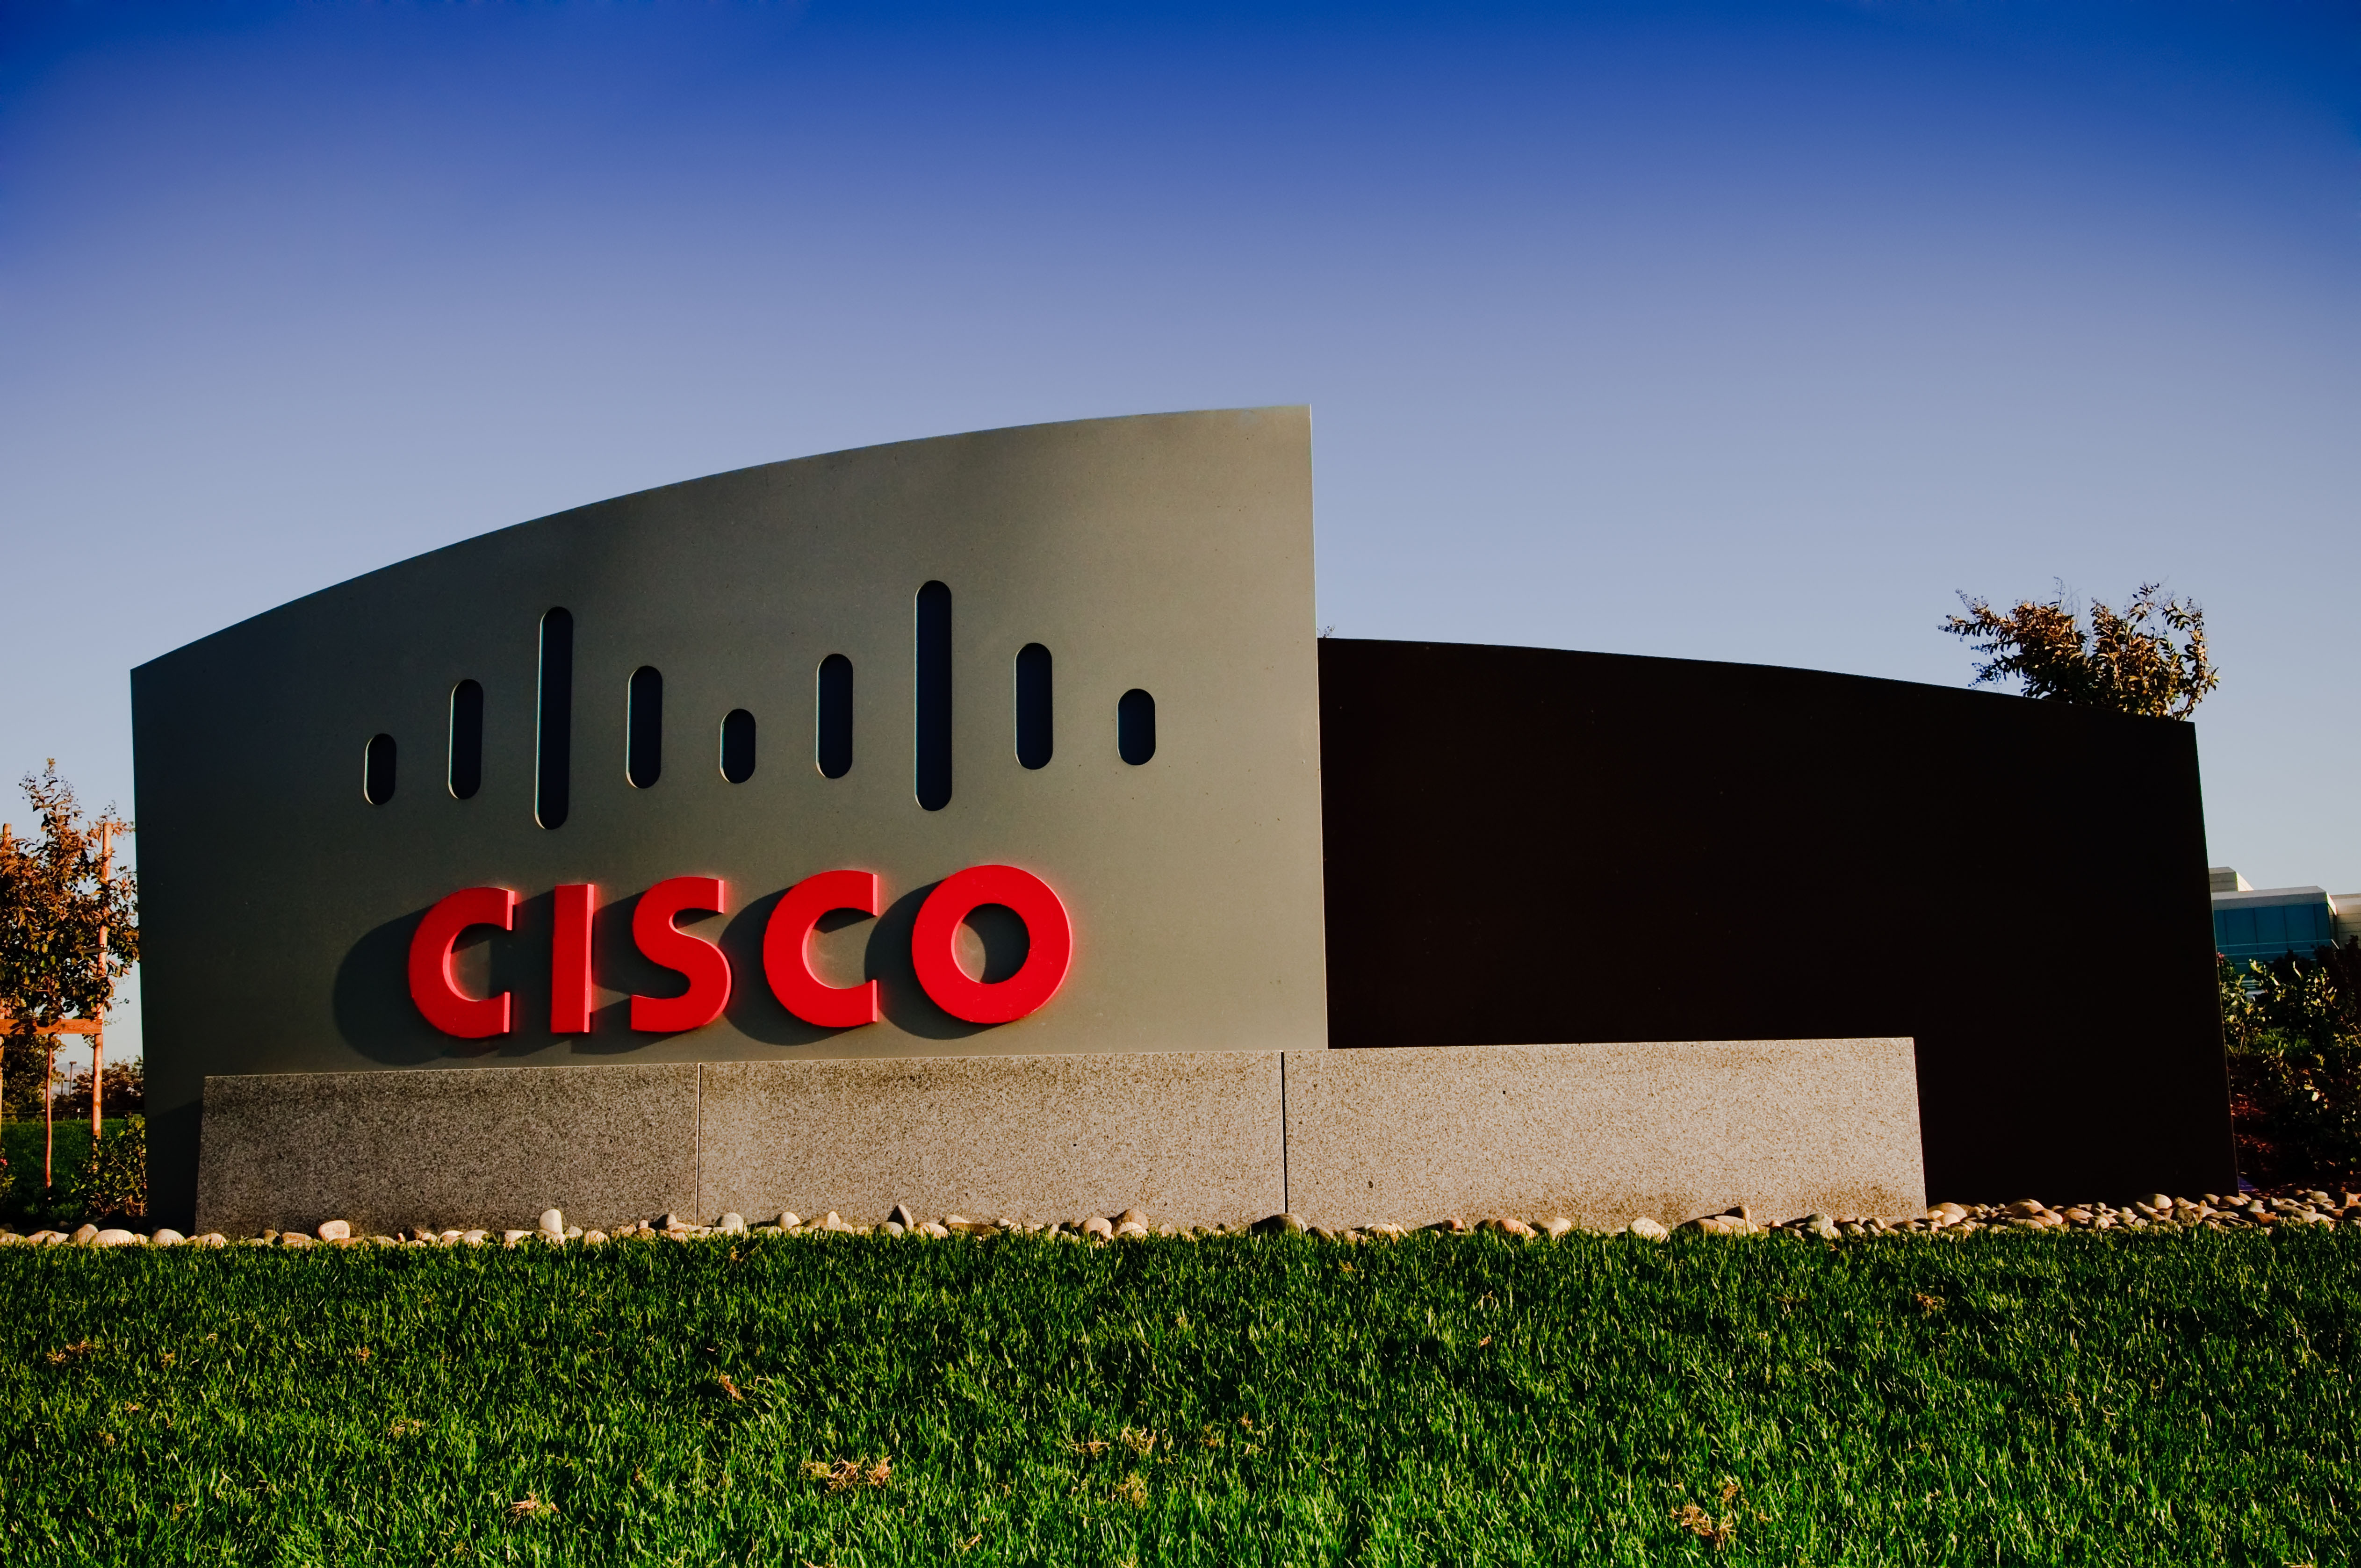 From Dark Reading – Cisco Finds New Zero Day Bug, Pledges Patches in Days